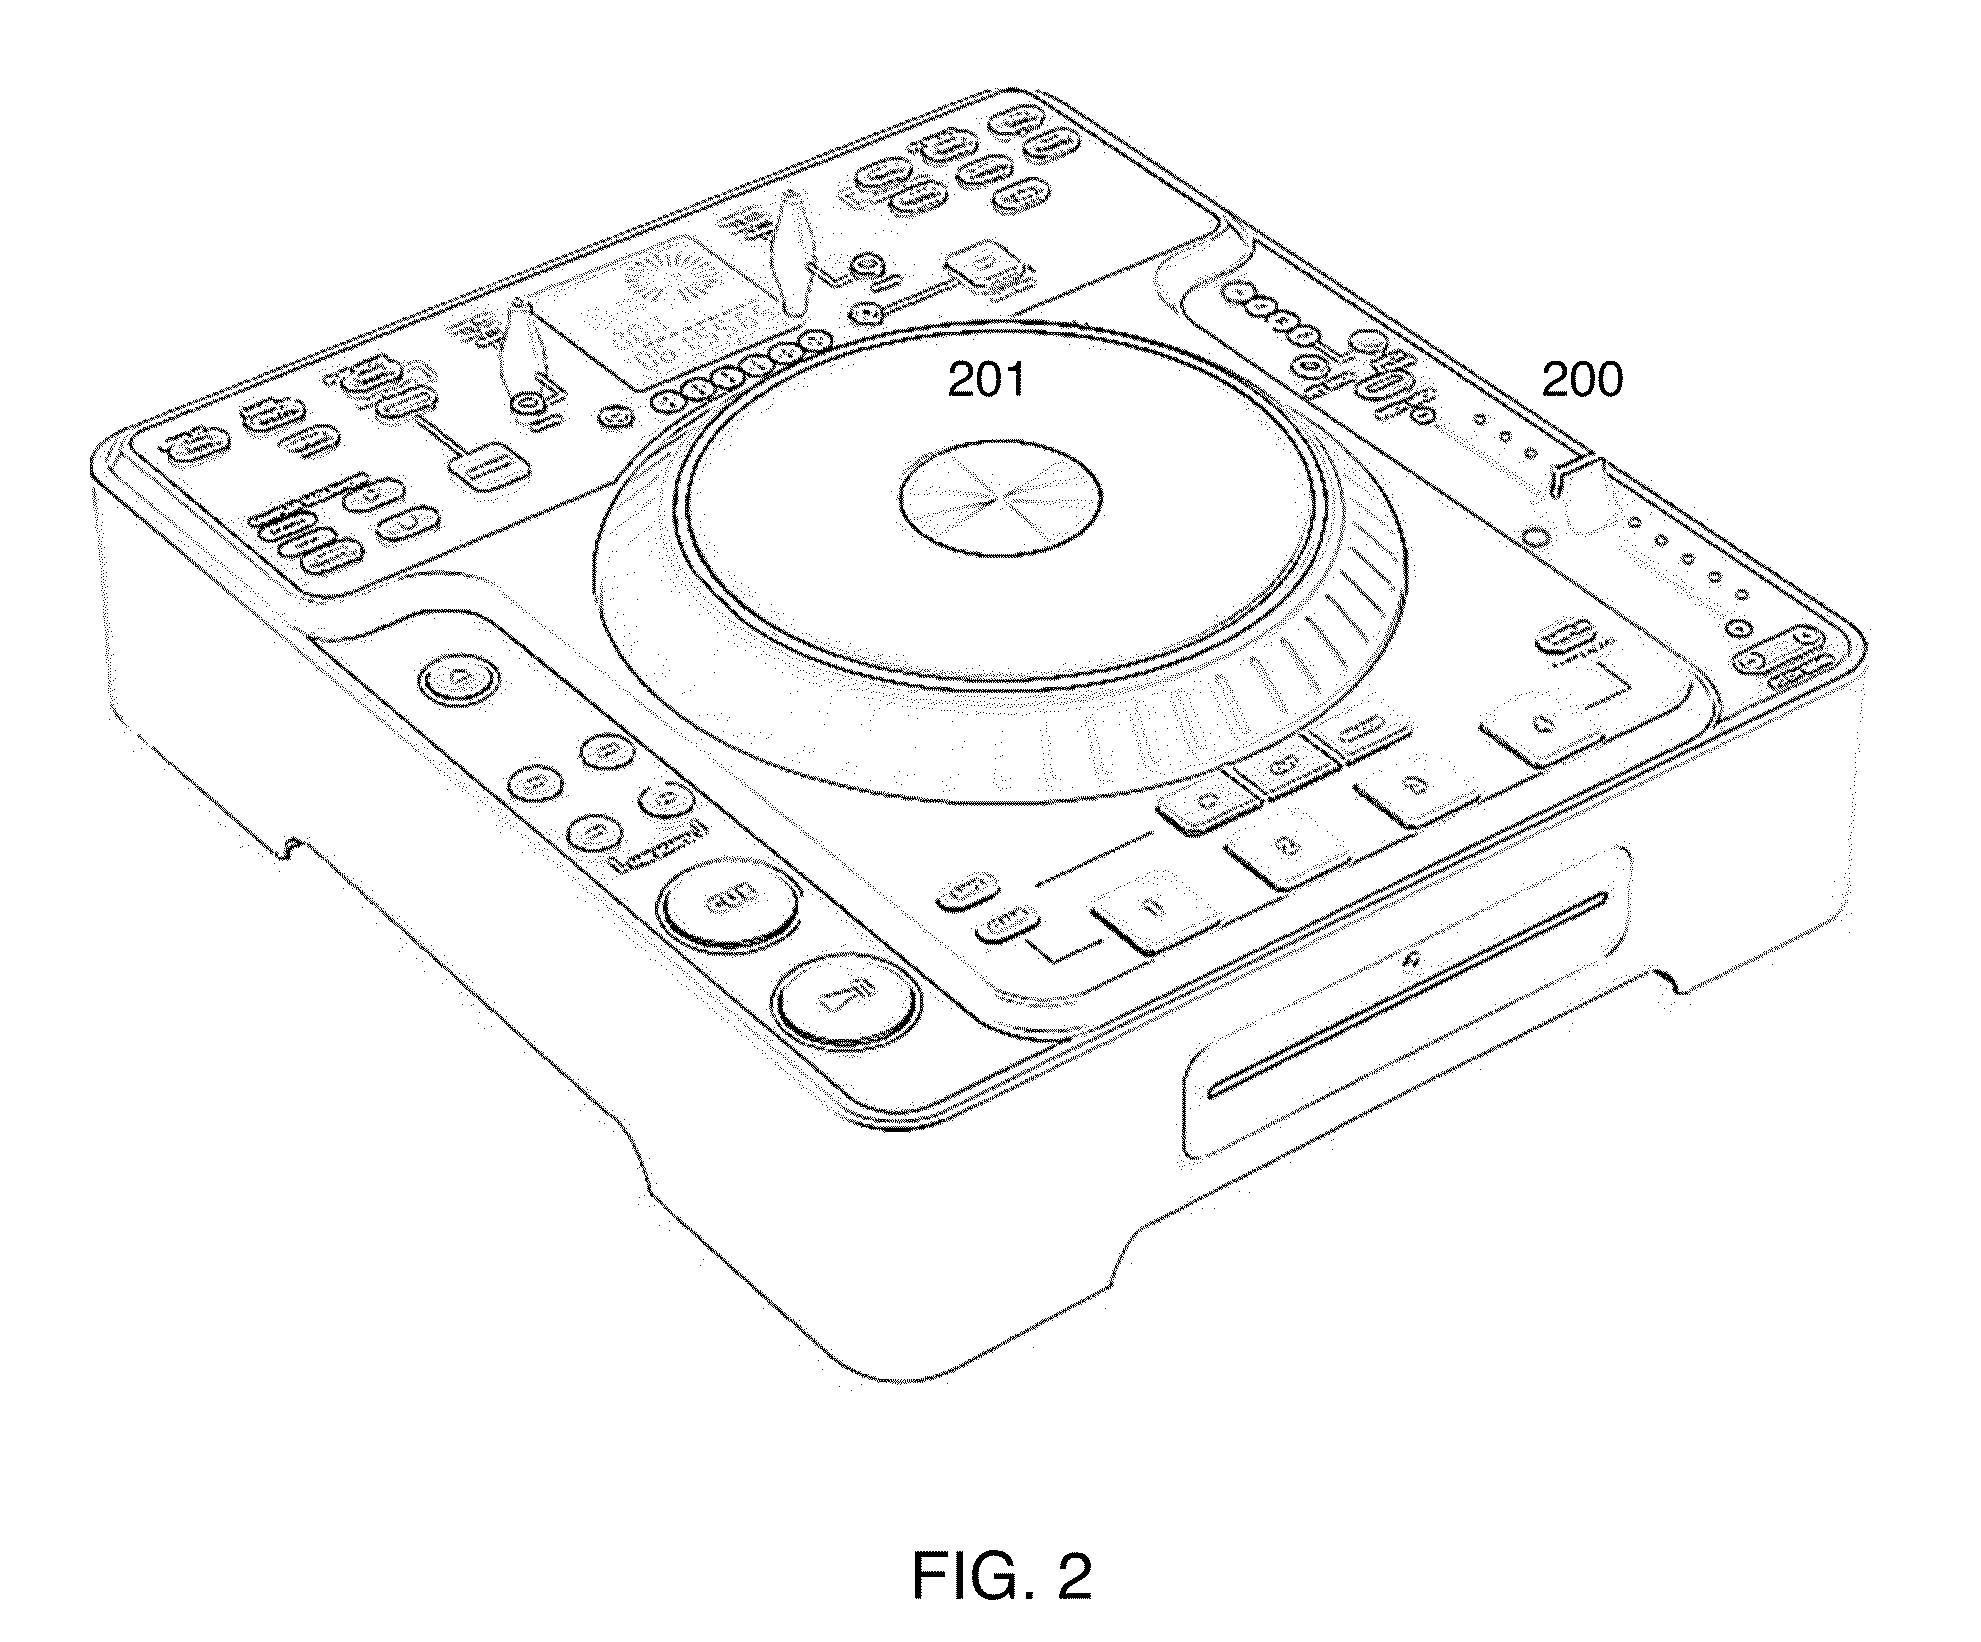 Touch Pad Disc Jockey Controller